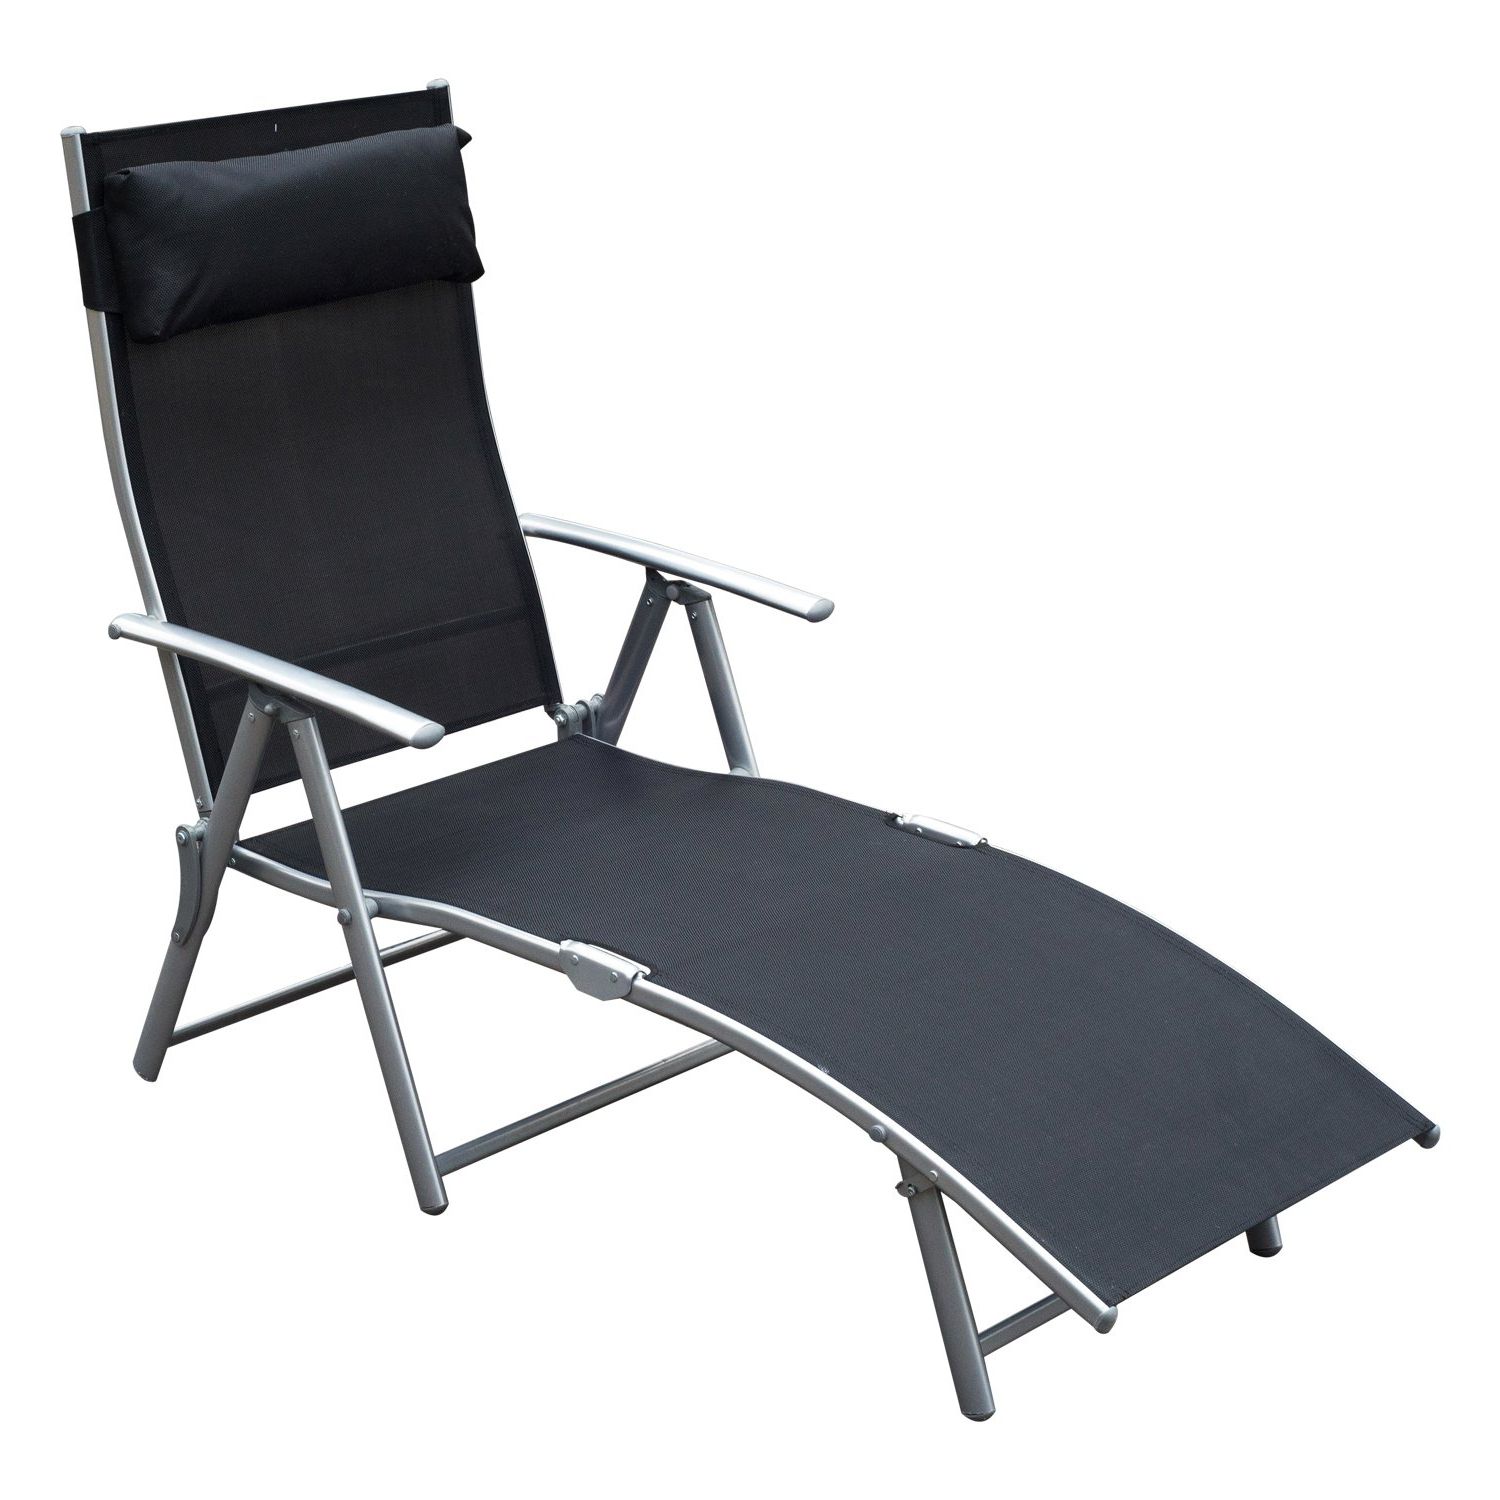 Steel Sling Fabric Outdoor Folding Chaise Lounges Pertaining To Preferred Steel Sling Fabric Outdoor Folding Chaise Lounge Chair Recliner (View 4 of 25)